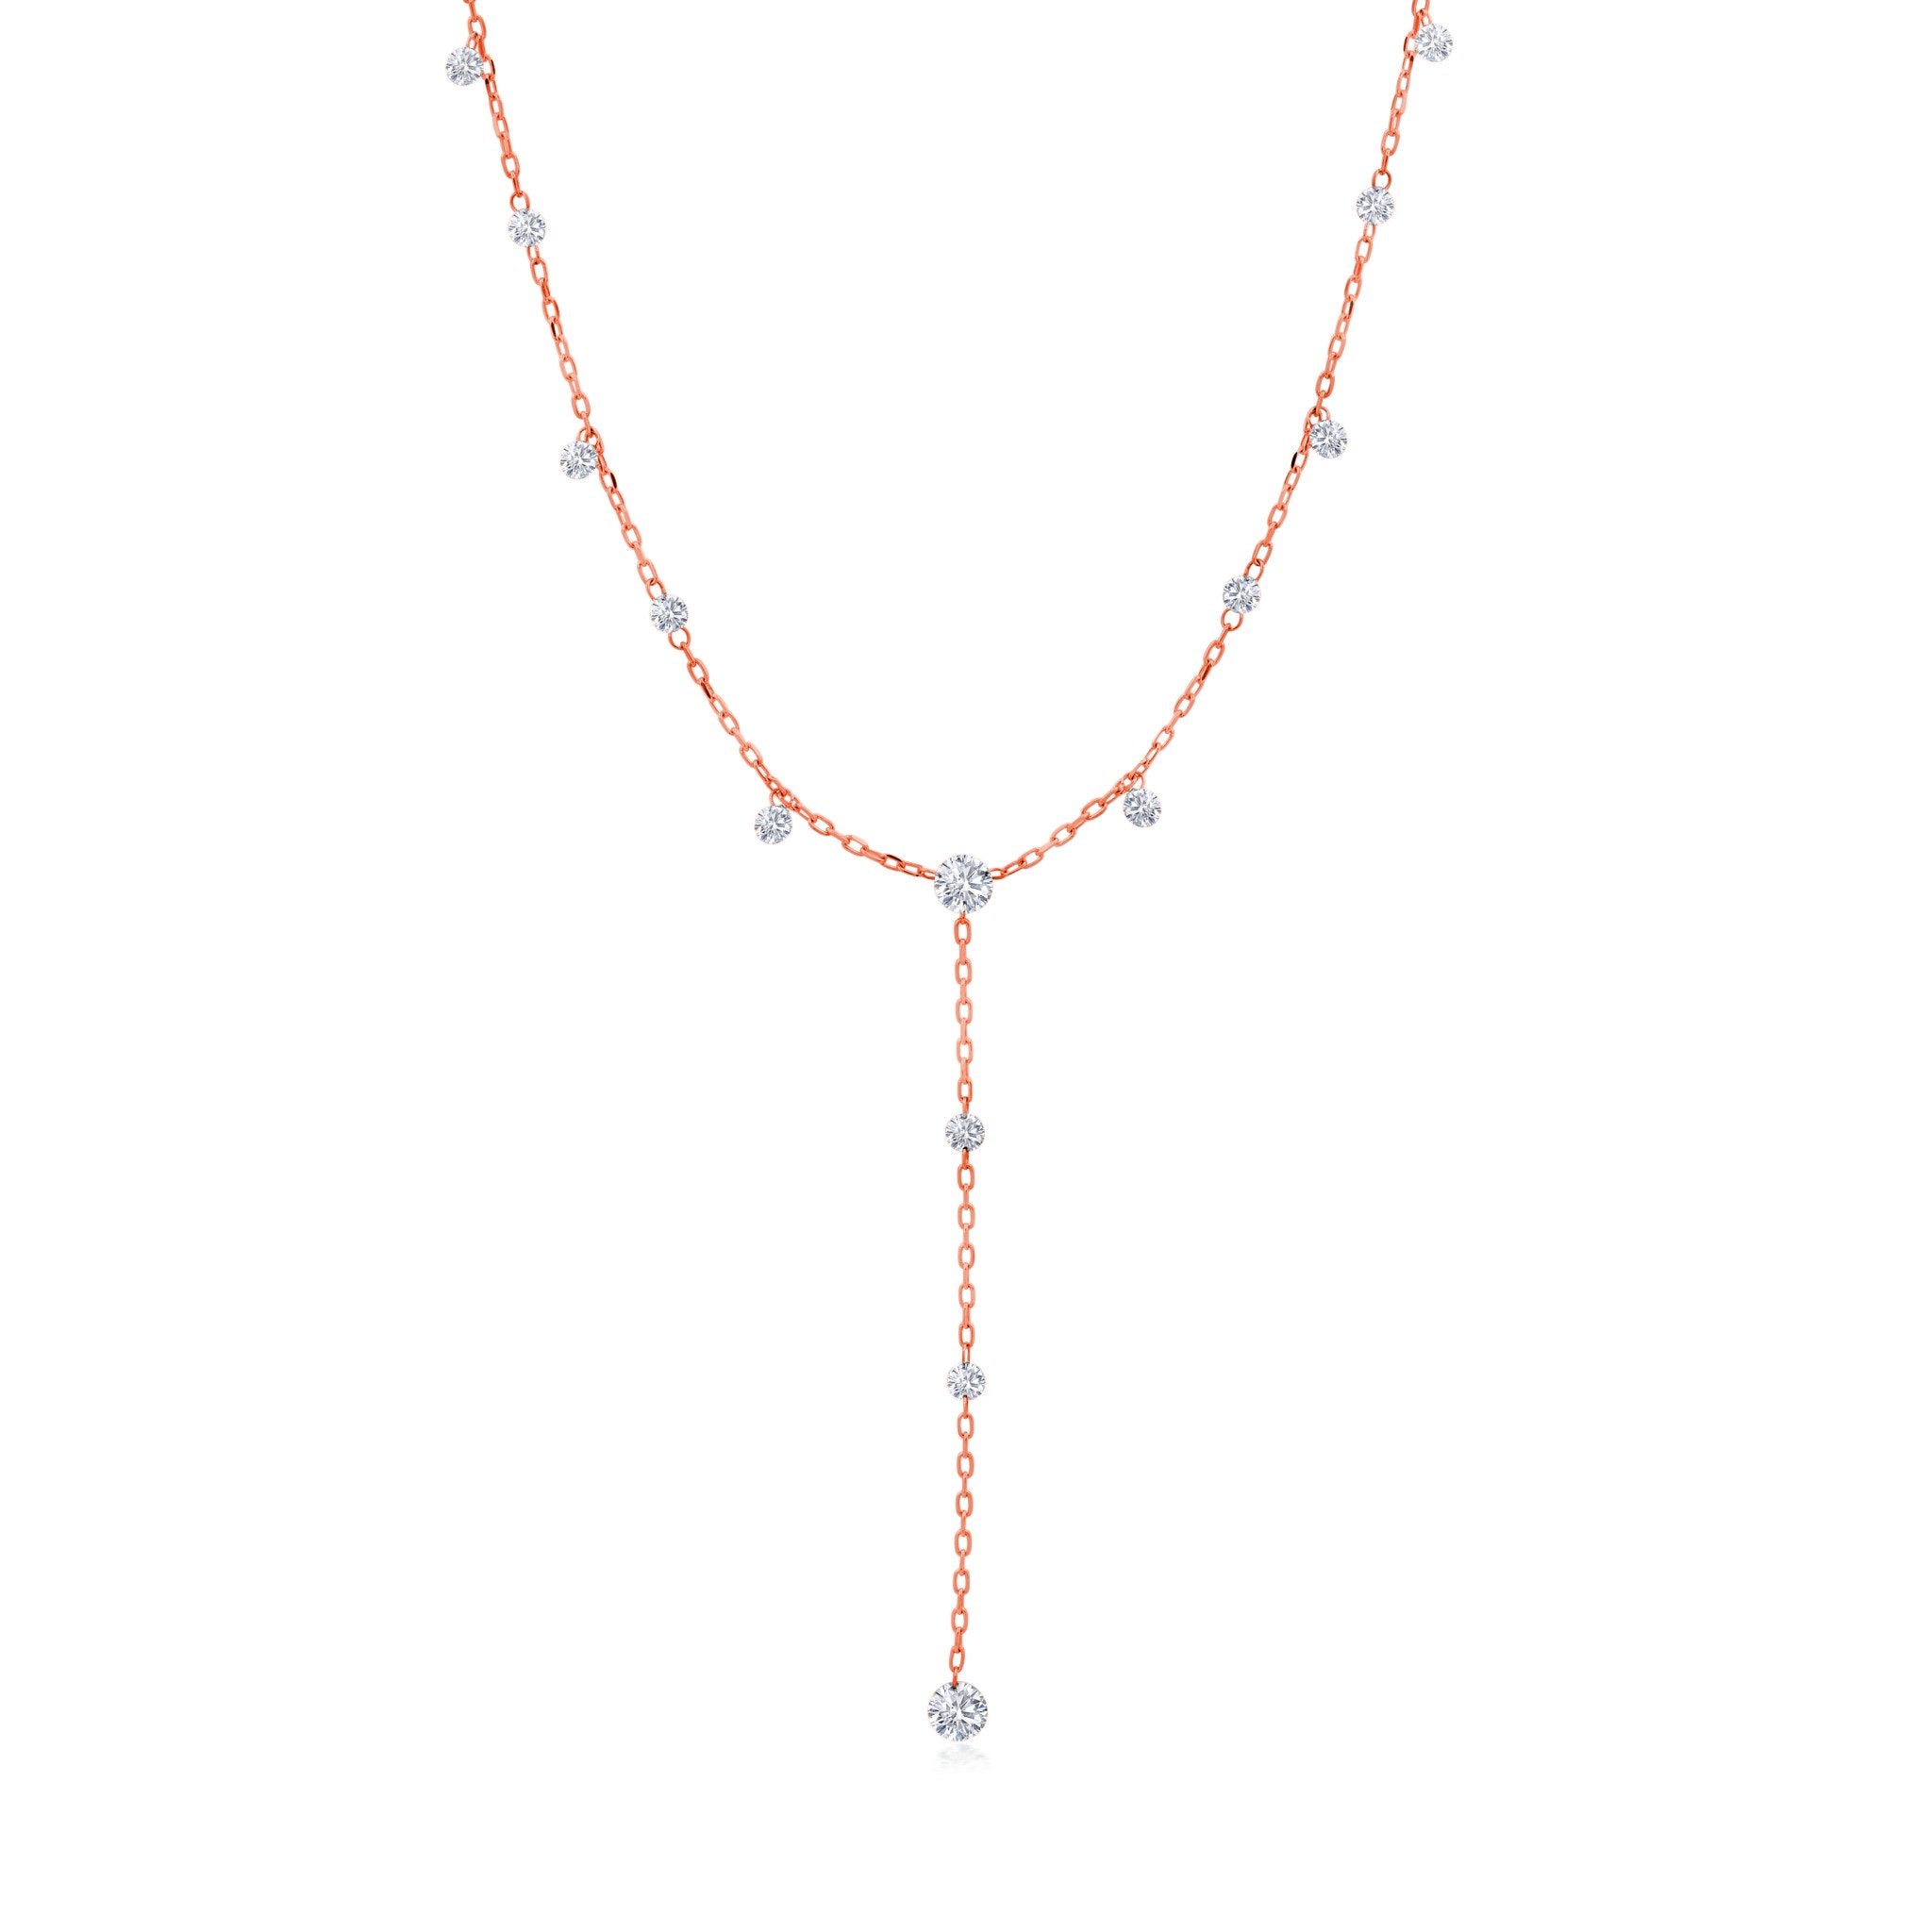 Graziela Gems - Necklace - 1 Ct Floating Diamond Y-Necklace - Rose Gold